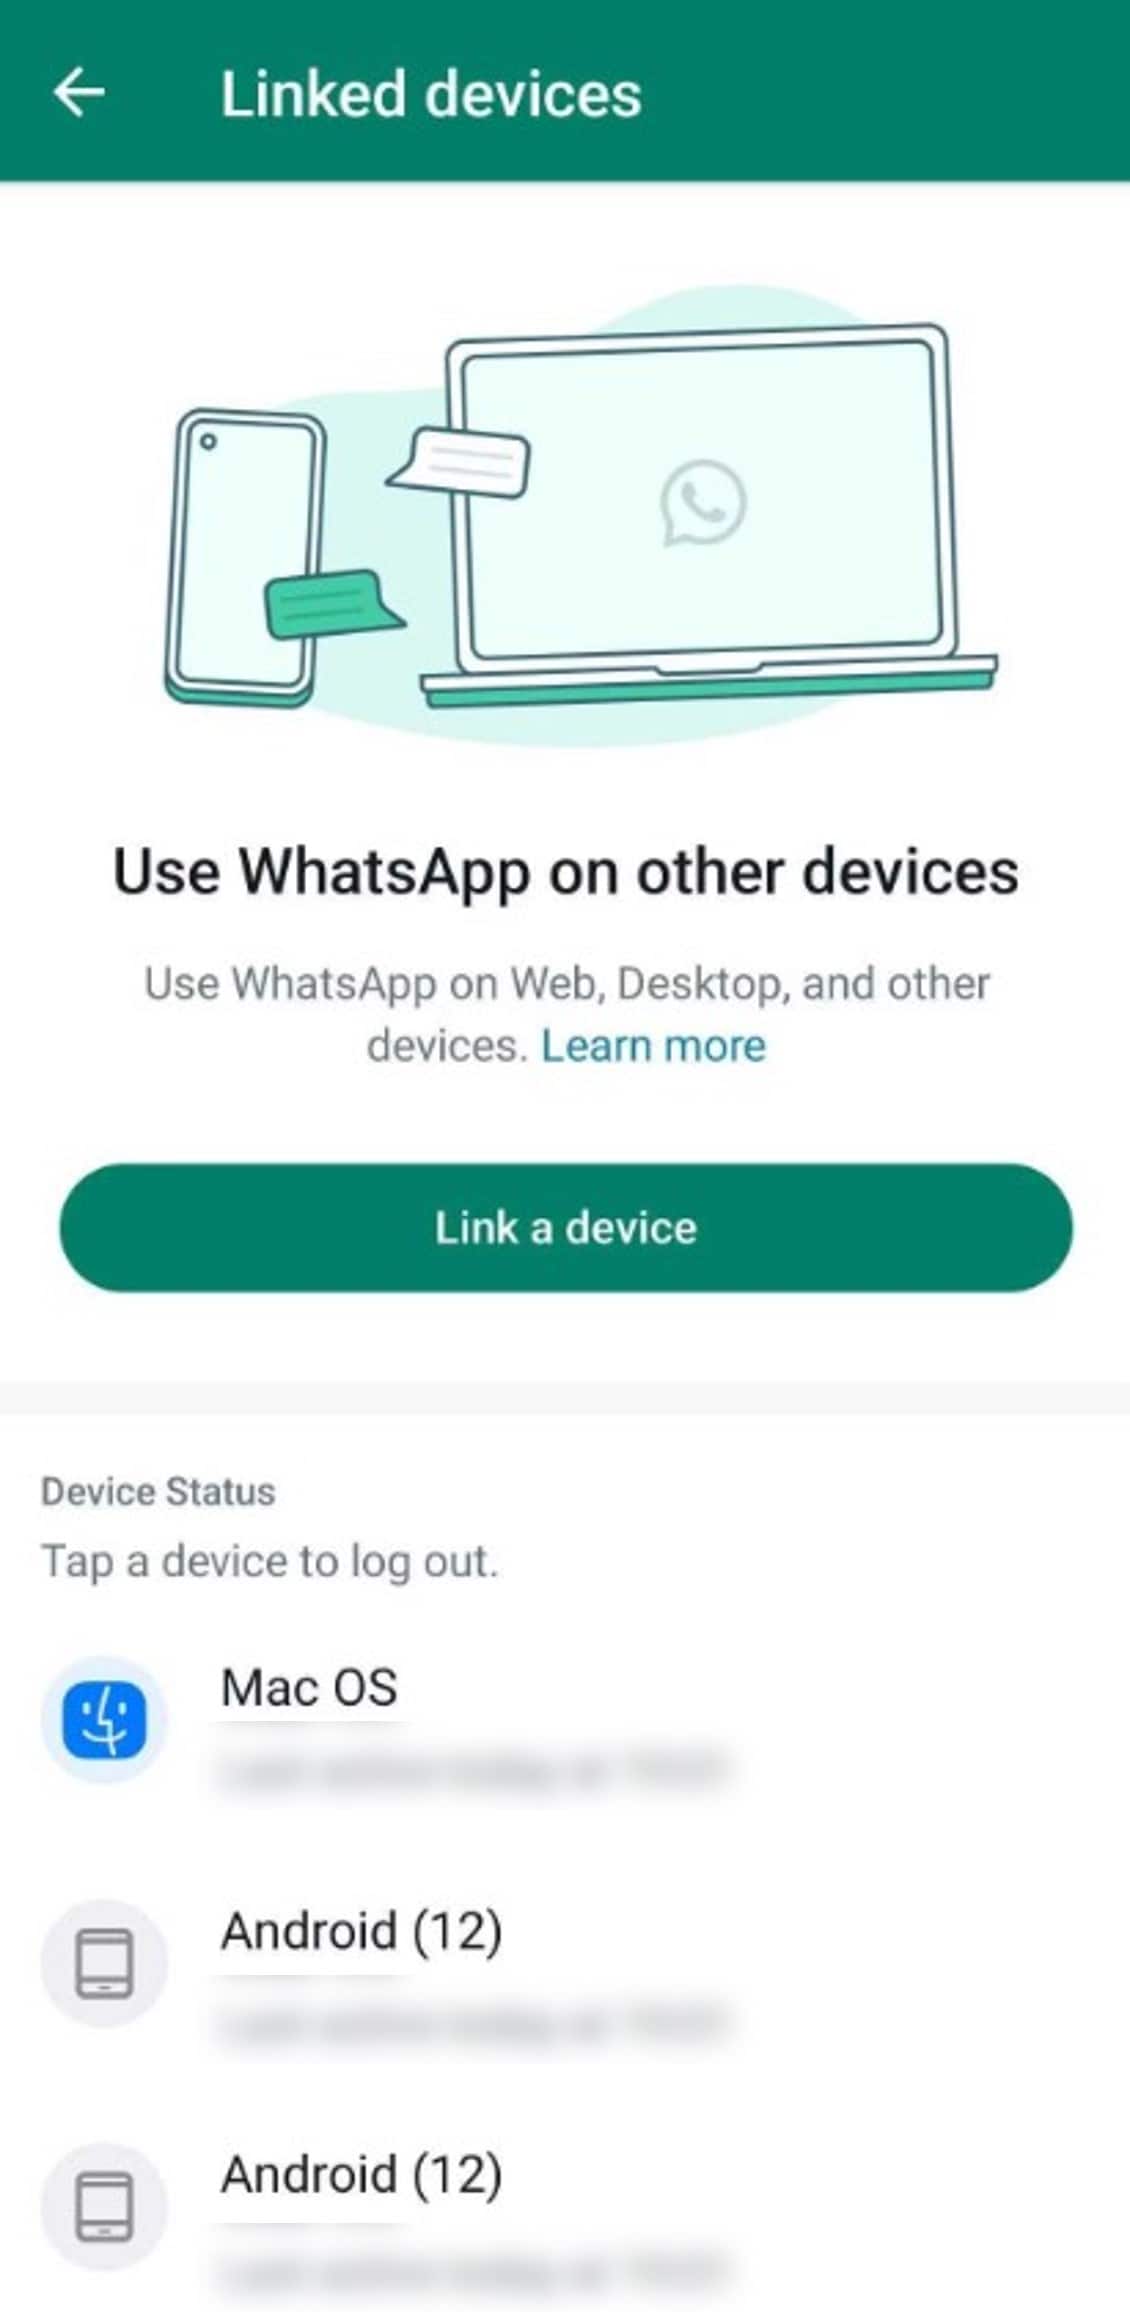 linked devices on whatsapp